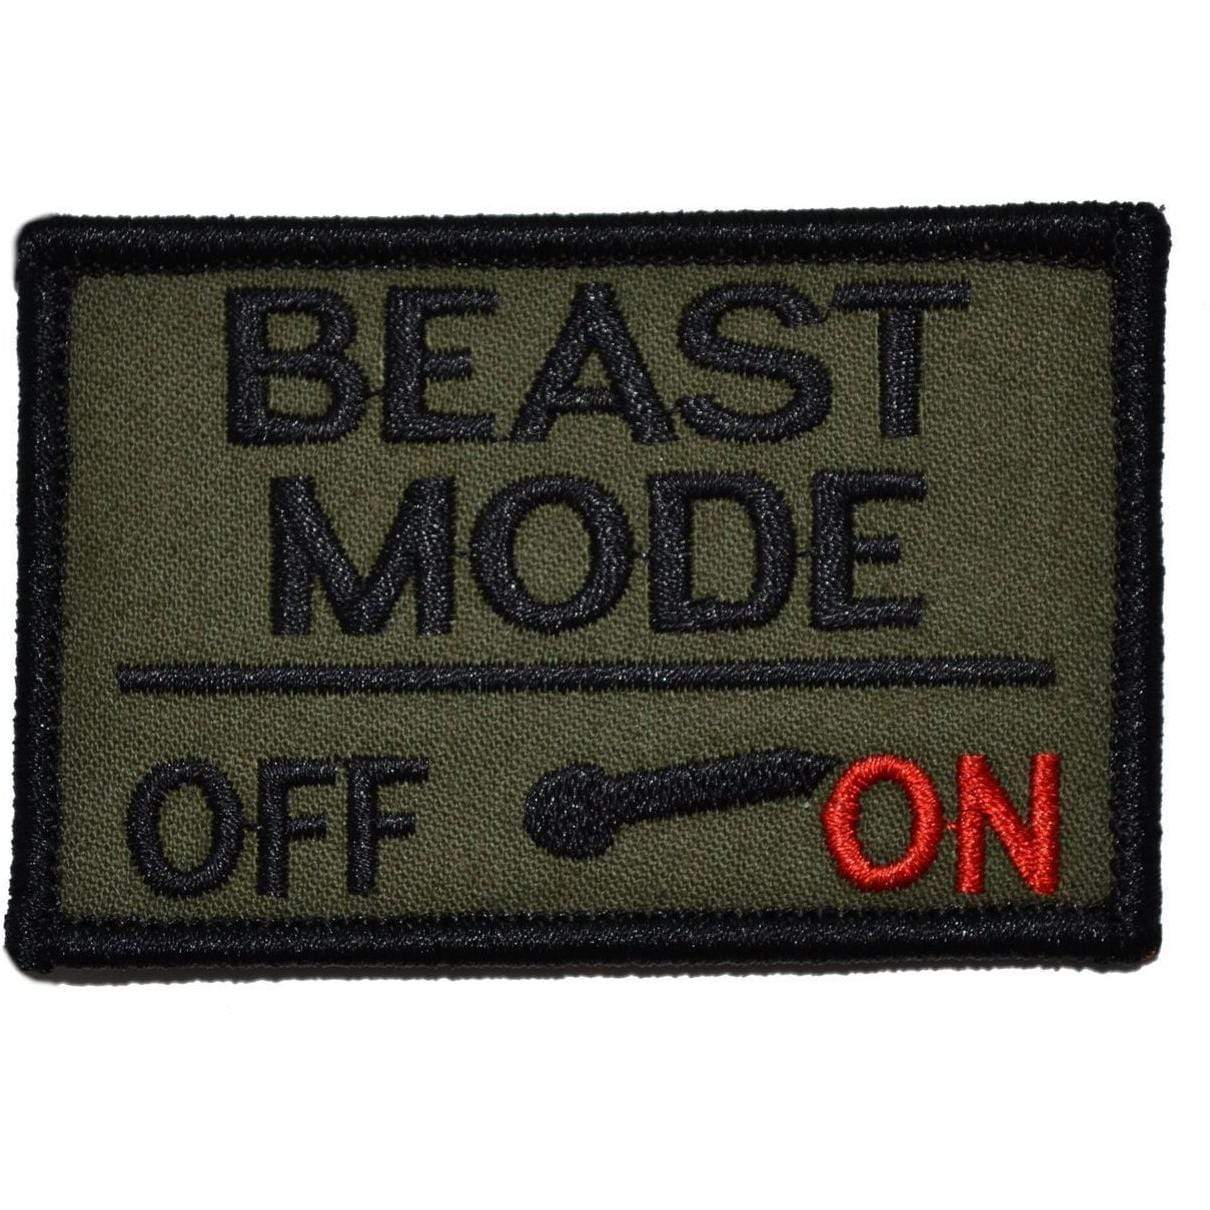 Tactical Gear Junkie Patches Olive Drab BEAST MODE Activated - 2x3 Patch